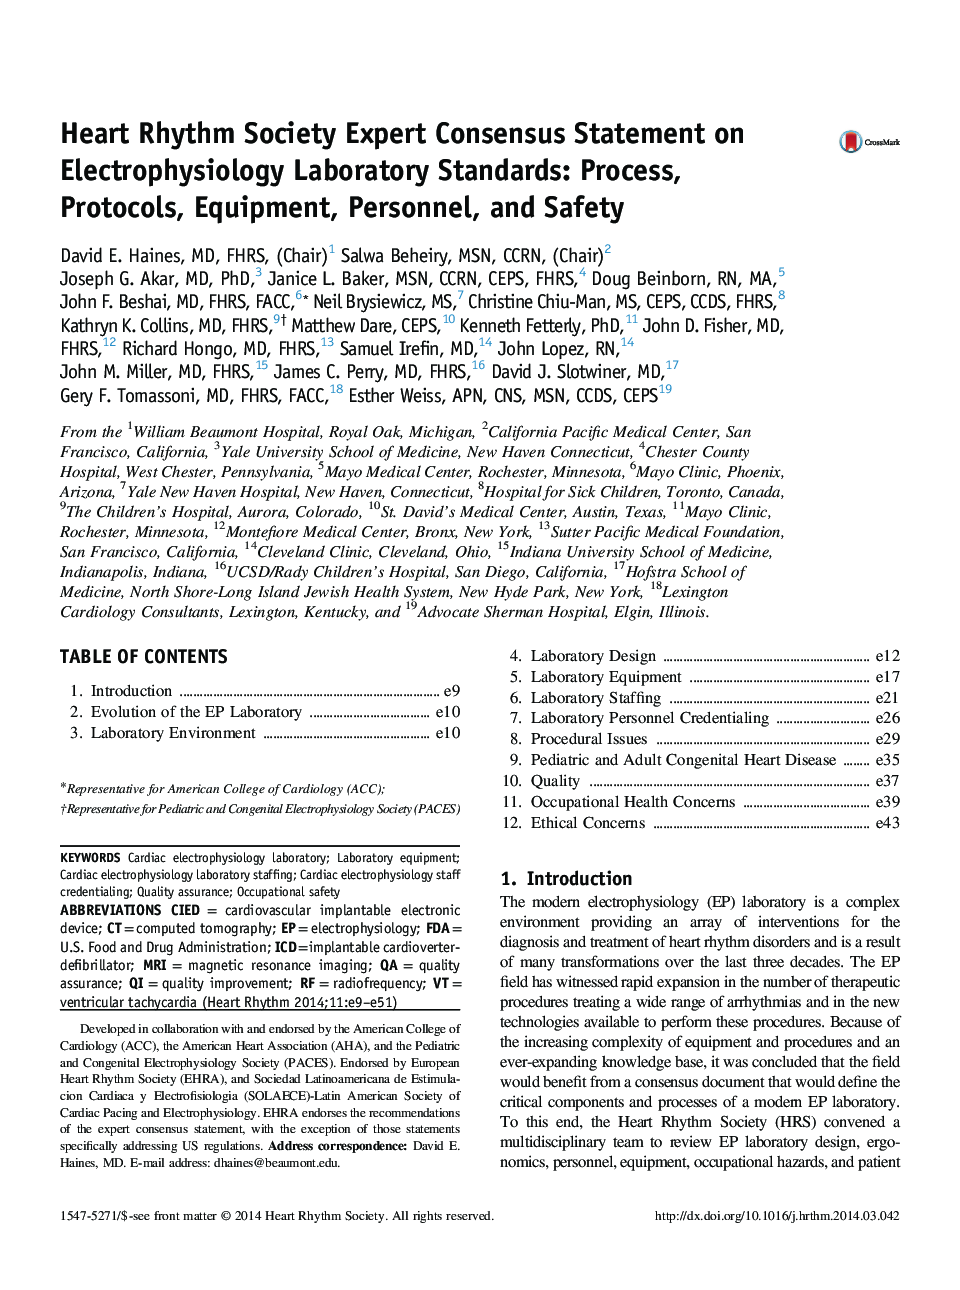 Heart Rhythm Society Expert Consensus Statement on Electrophysiology Laboratory Standards: Process, Protocols, Equipment, Personnel, and Safety